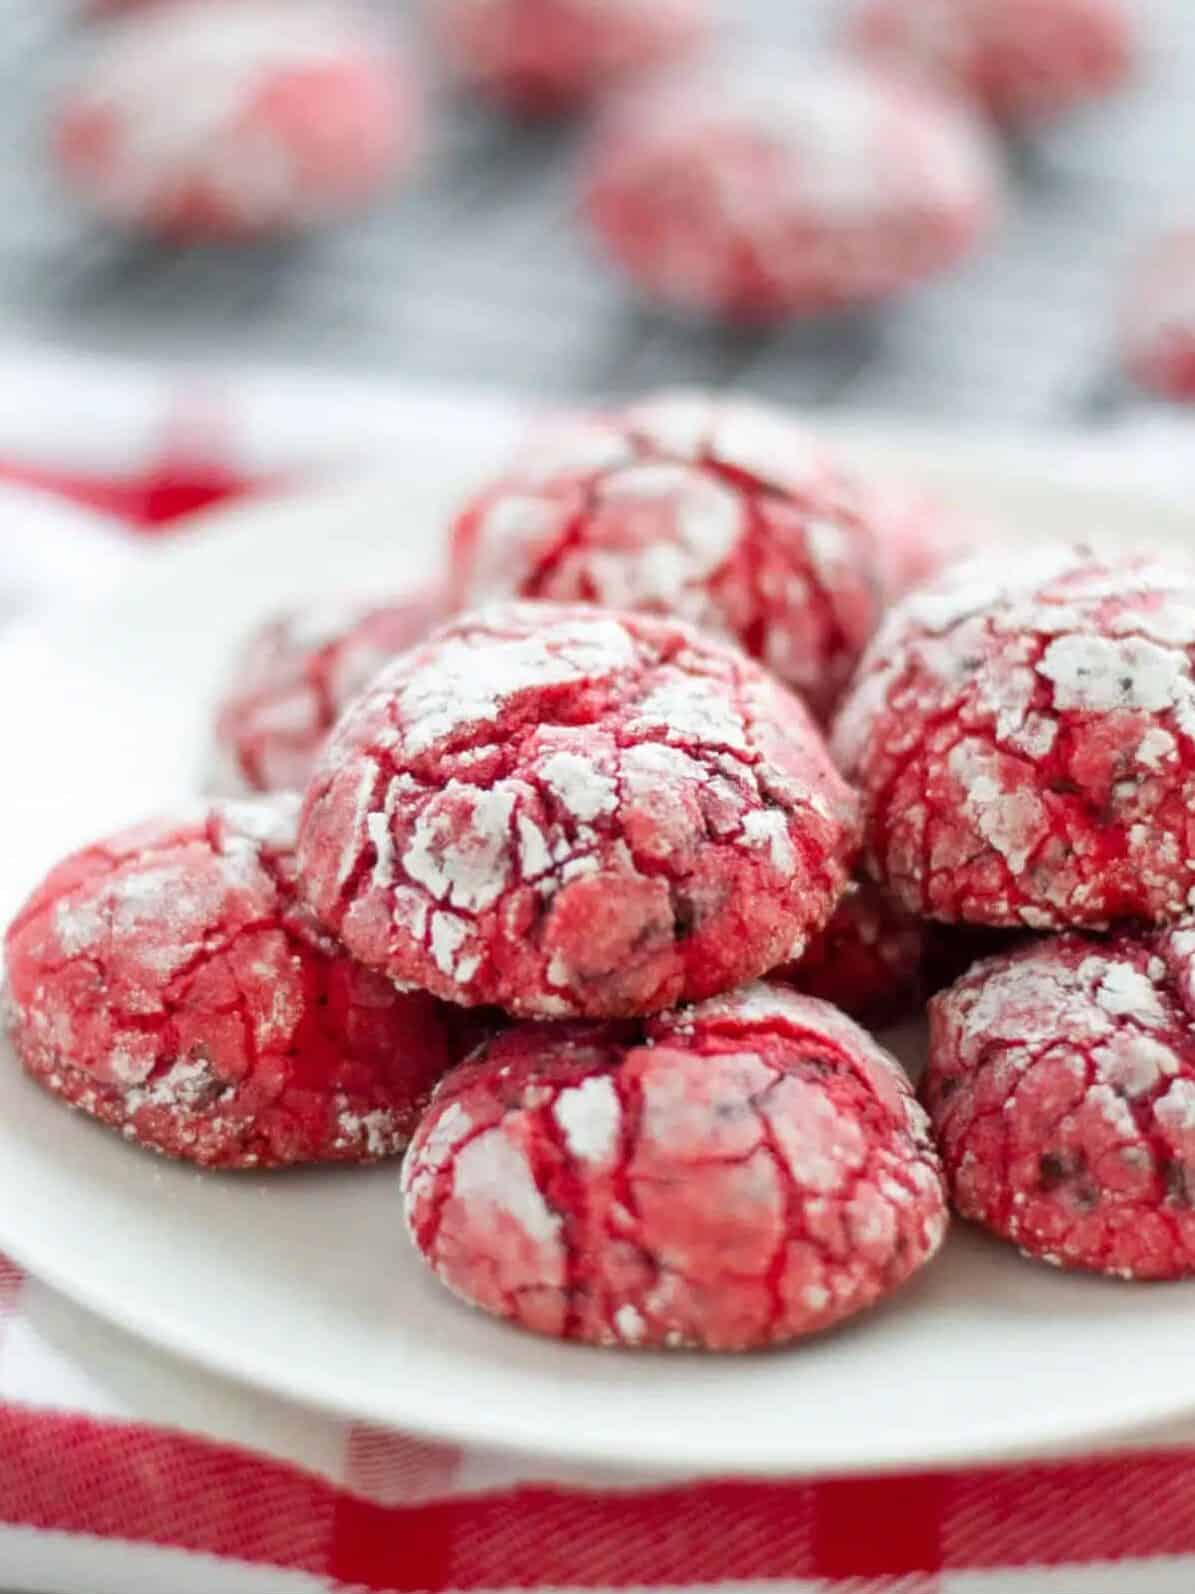 Gorgeous red cherry chocolate crinkles with cracked top and fudgy centers